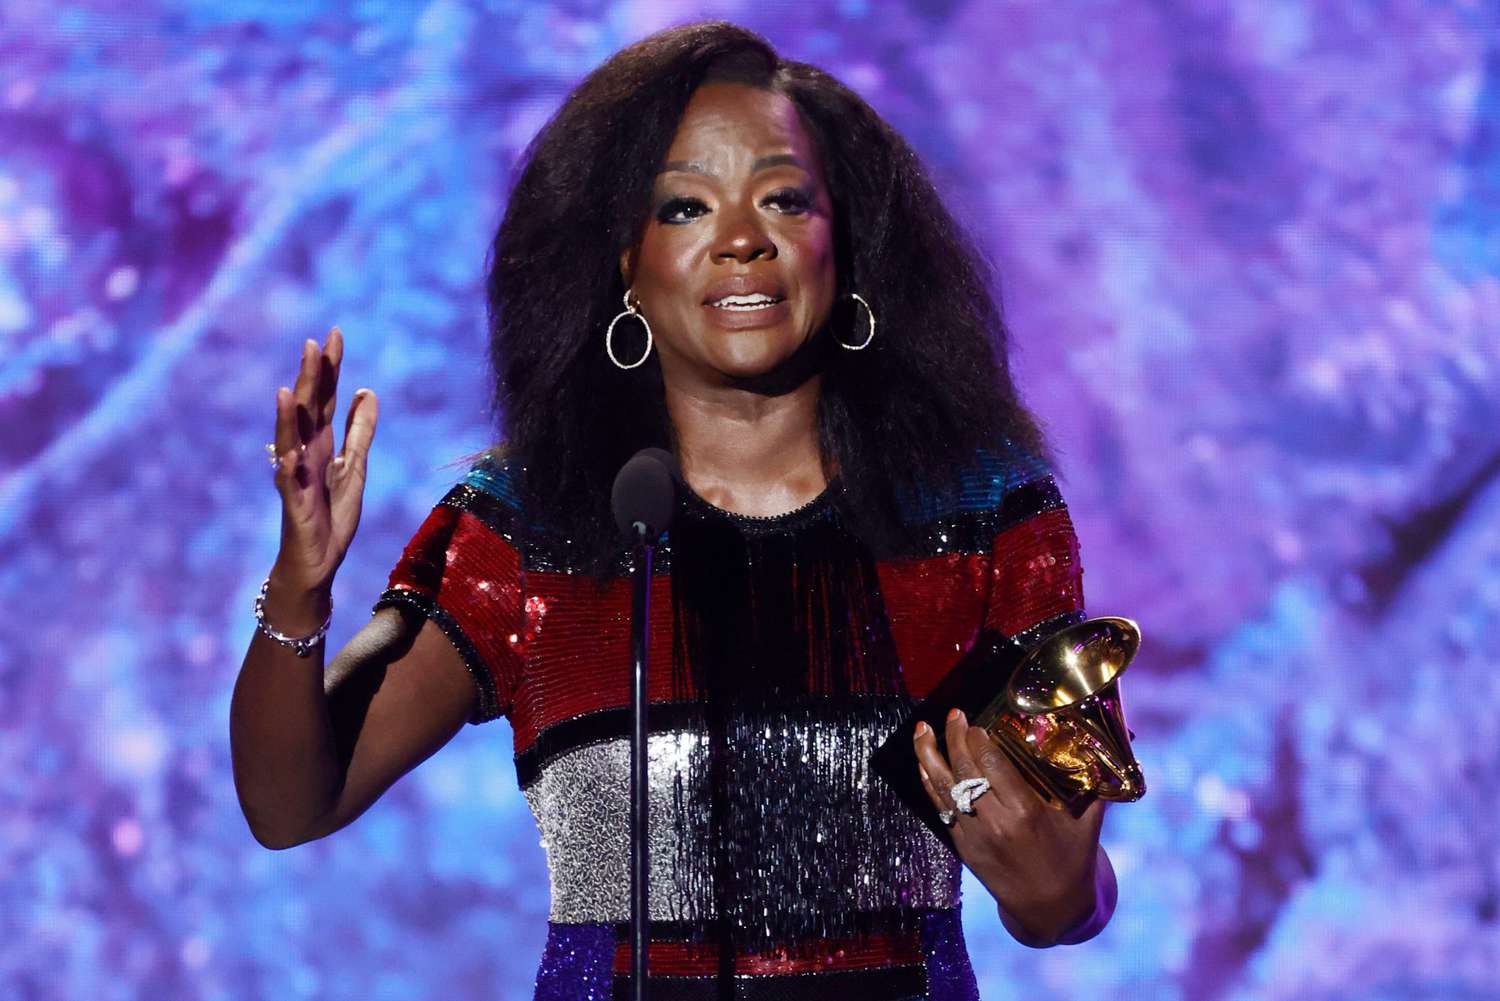 LOS ANGELES, CALIFORNIA - FEBRUARY 05: (FOR EDITORIAL USE ONLY) Viola Davis accepts the Best Audio Book, Narration, and Storytelling award for "Finding Me" onstage during the 65th GRAMMY Awards Premiere Ceremony at Microsoft Theater on February 05, 2023 in Los Angeles, California. (Photo by Frazer Harrison/Getty Images)